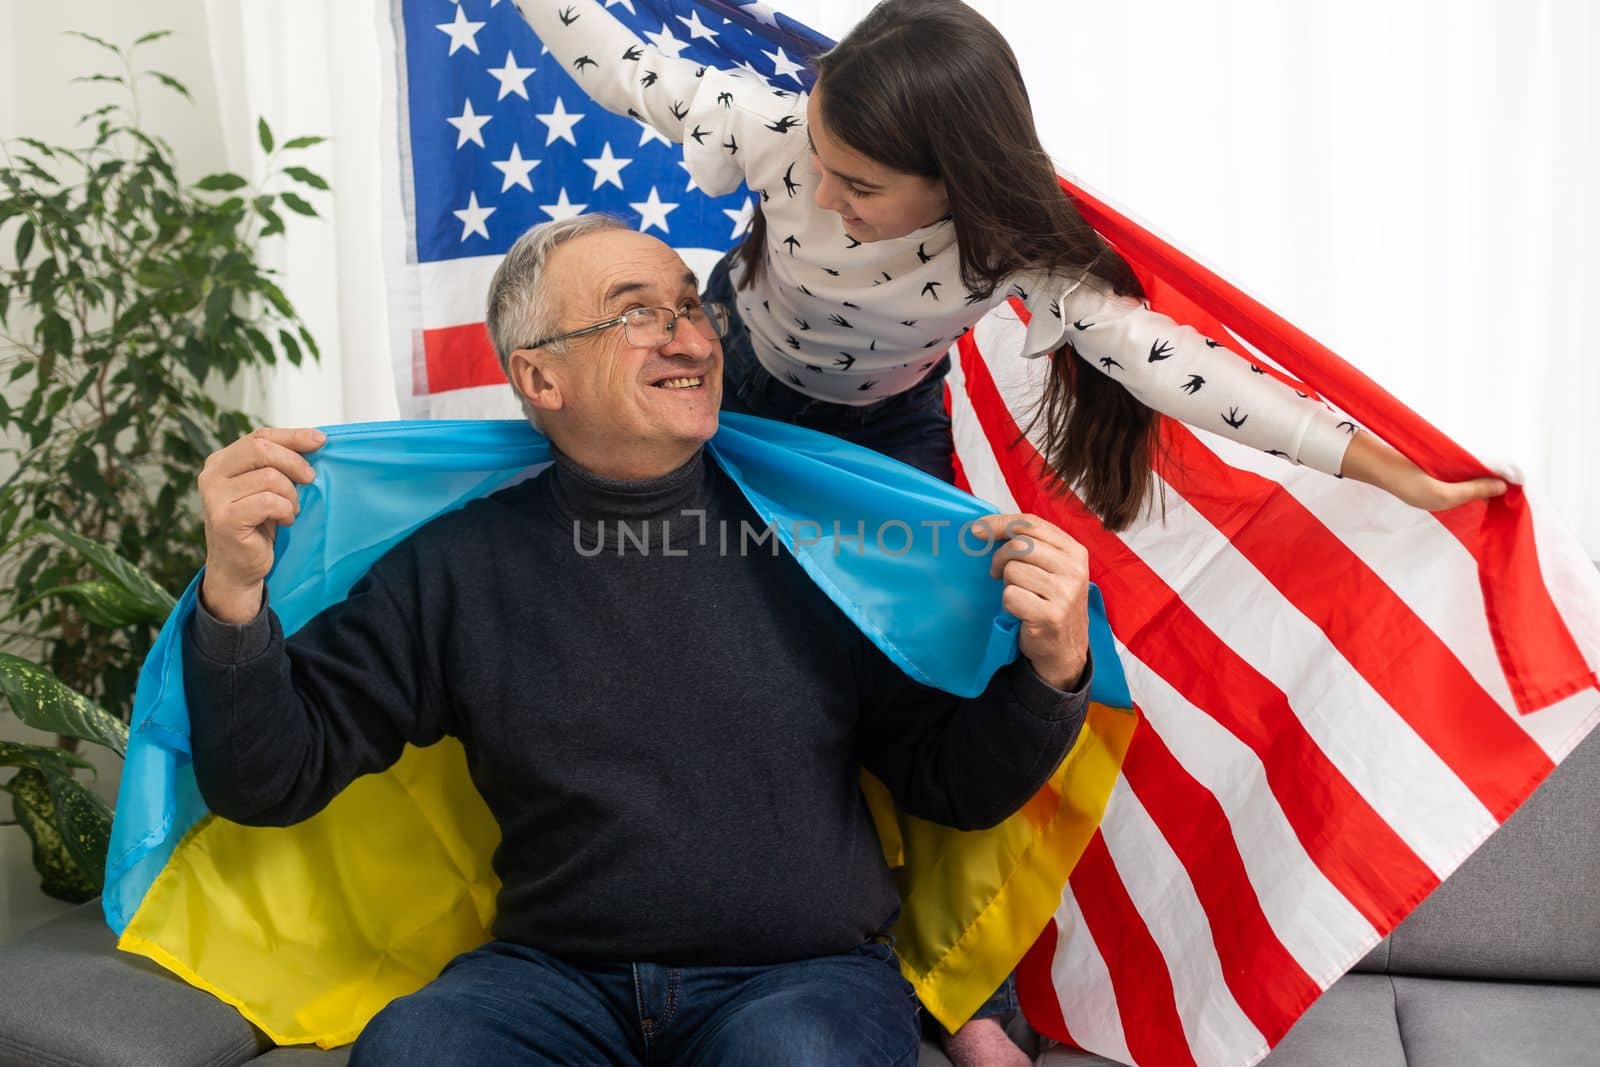 grandfather and granddaughter with the flags of the USA and Ukraine by Andelov13